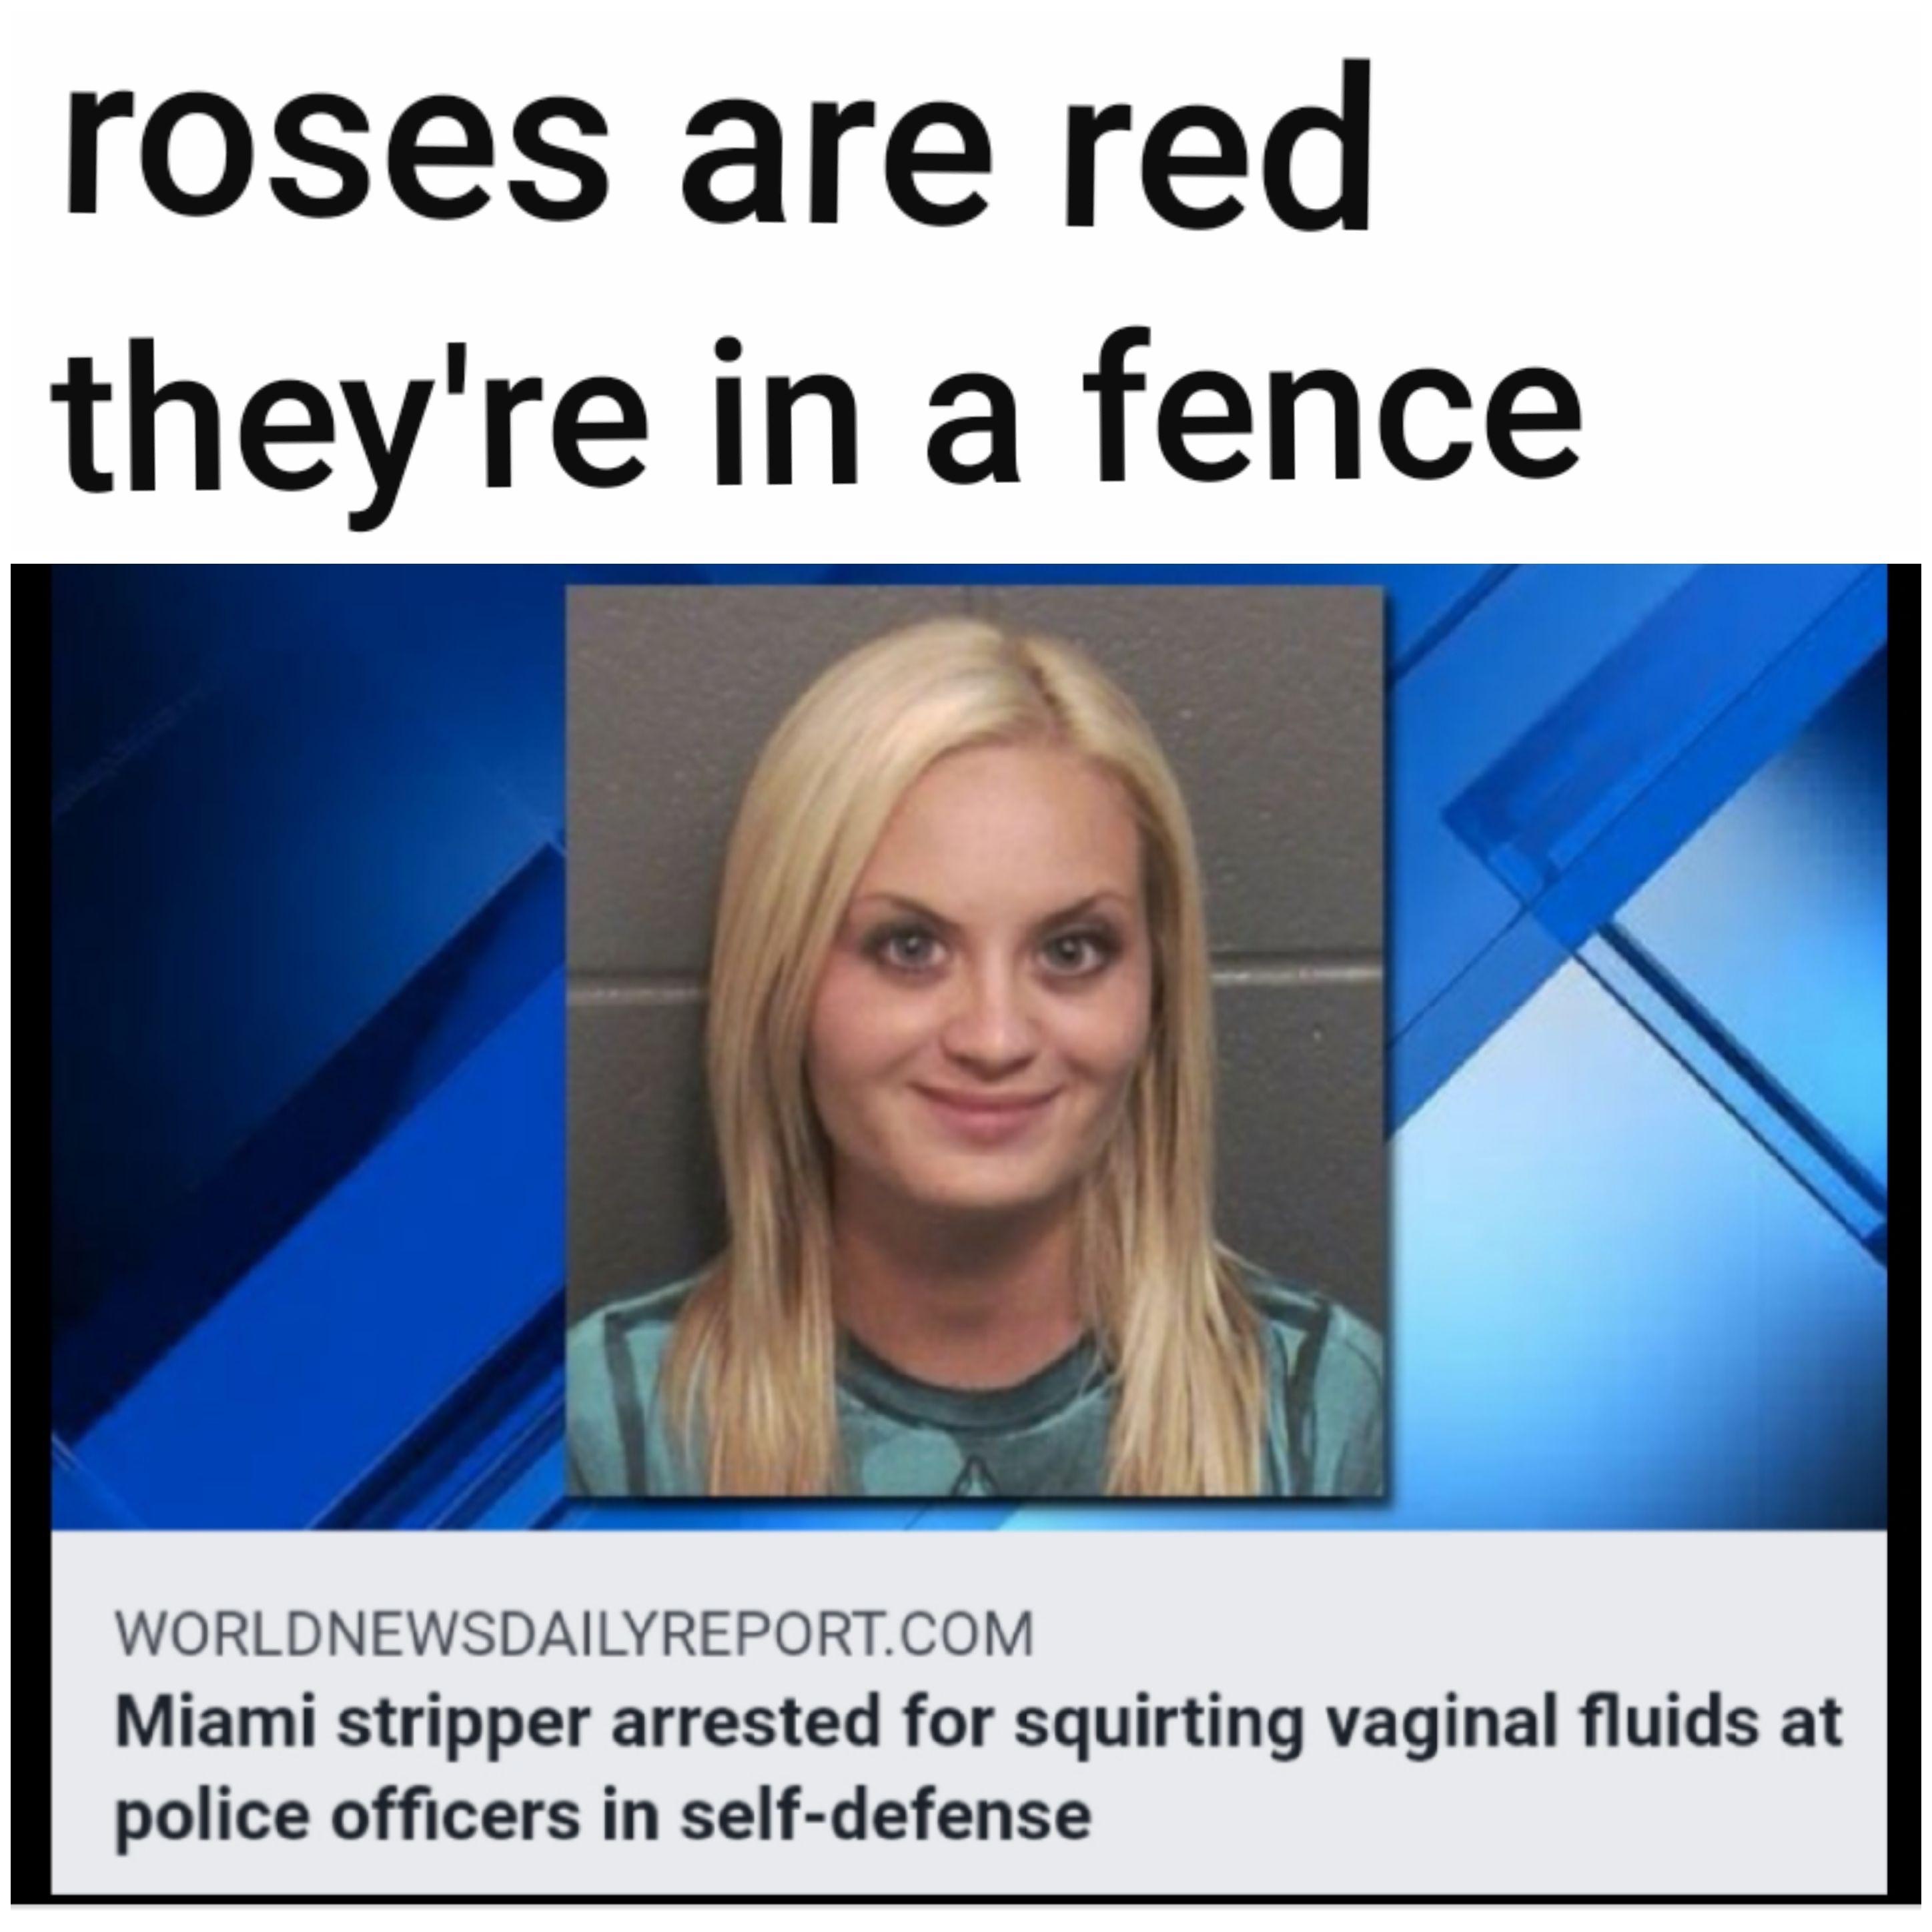 jaw - roses are red they're in a fence Worldnewsdailyreport.Com Miami stripper arrested for squirting vaginal fluids at police officers in selfdefense